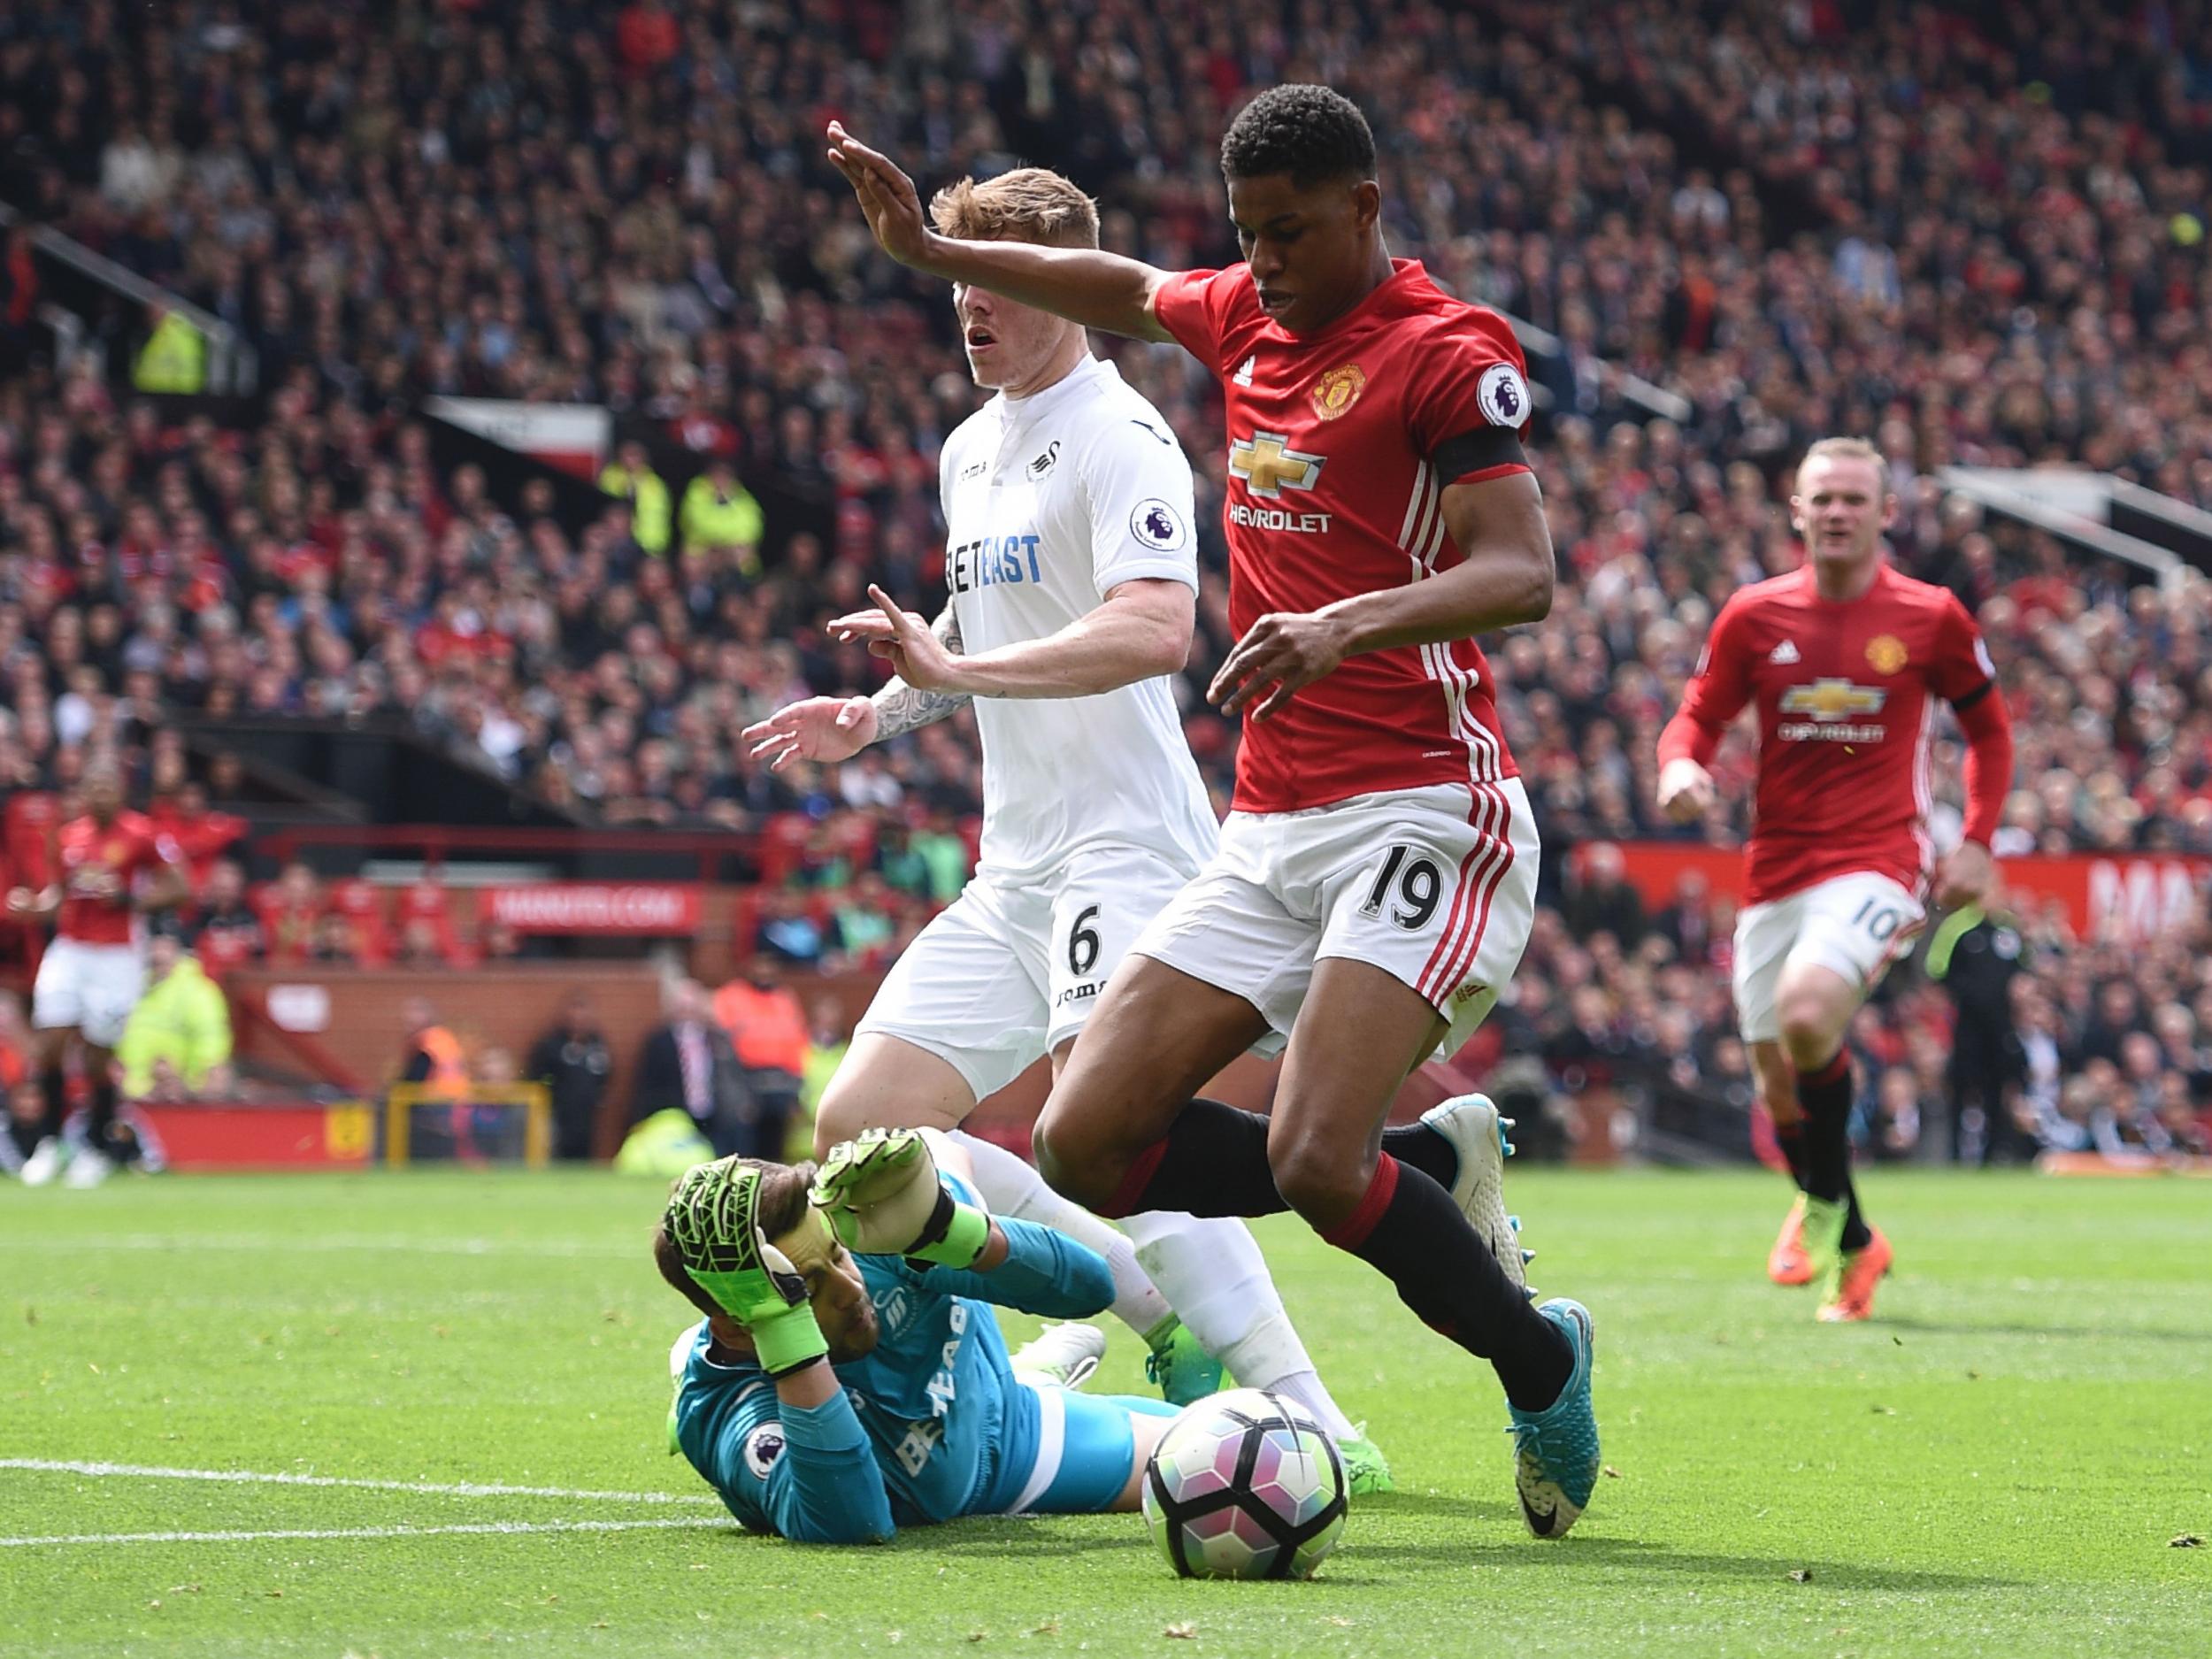 Rashford went to ground very softly in the first-half